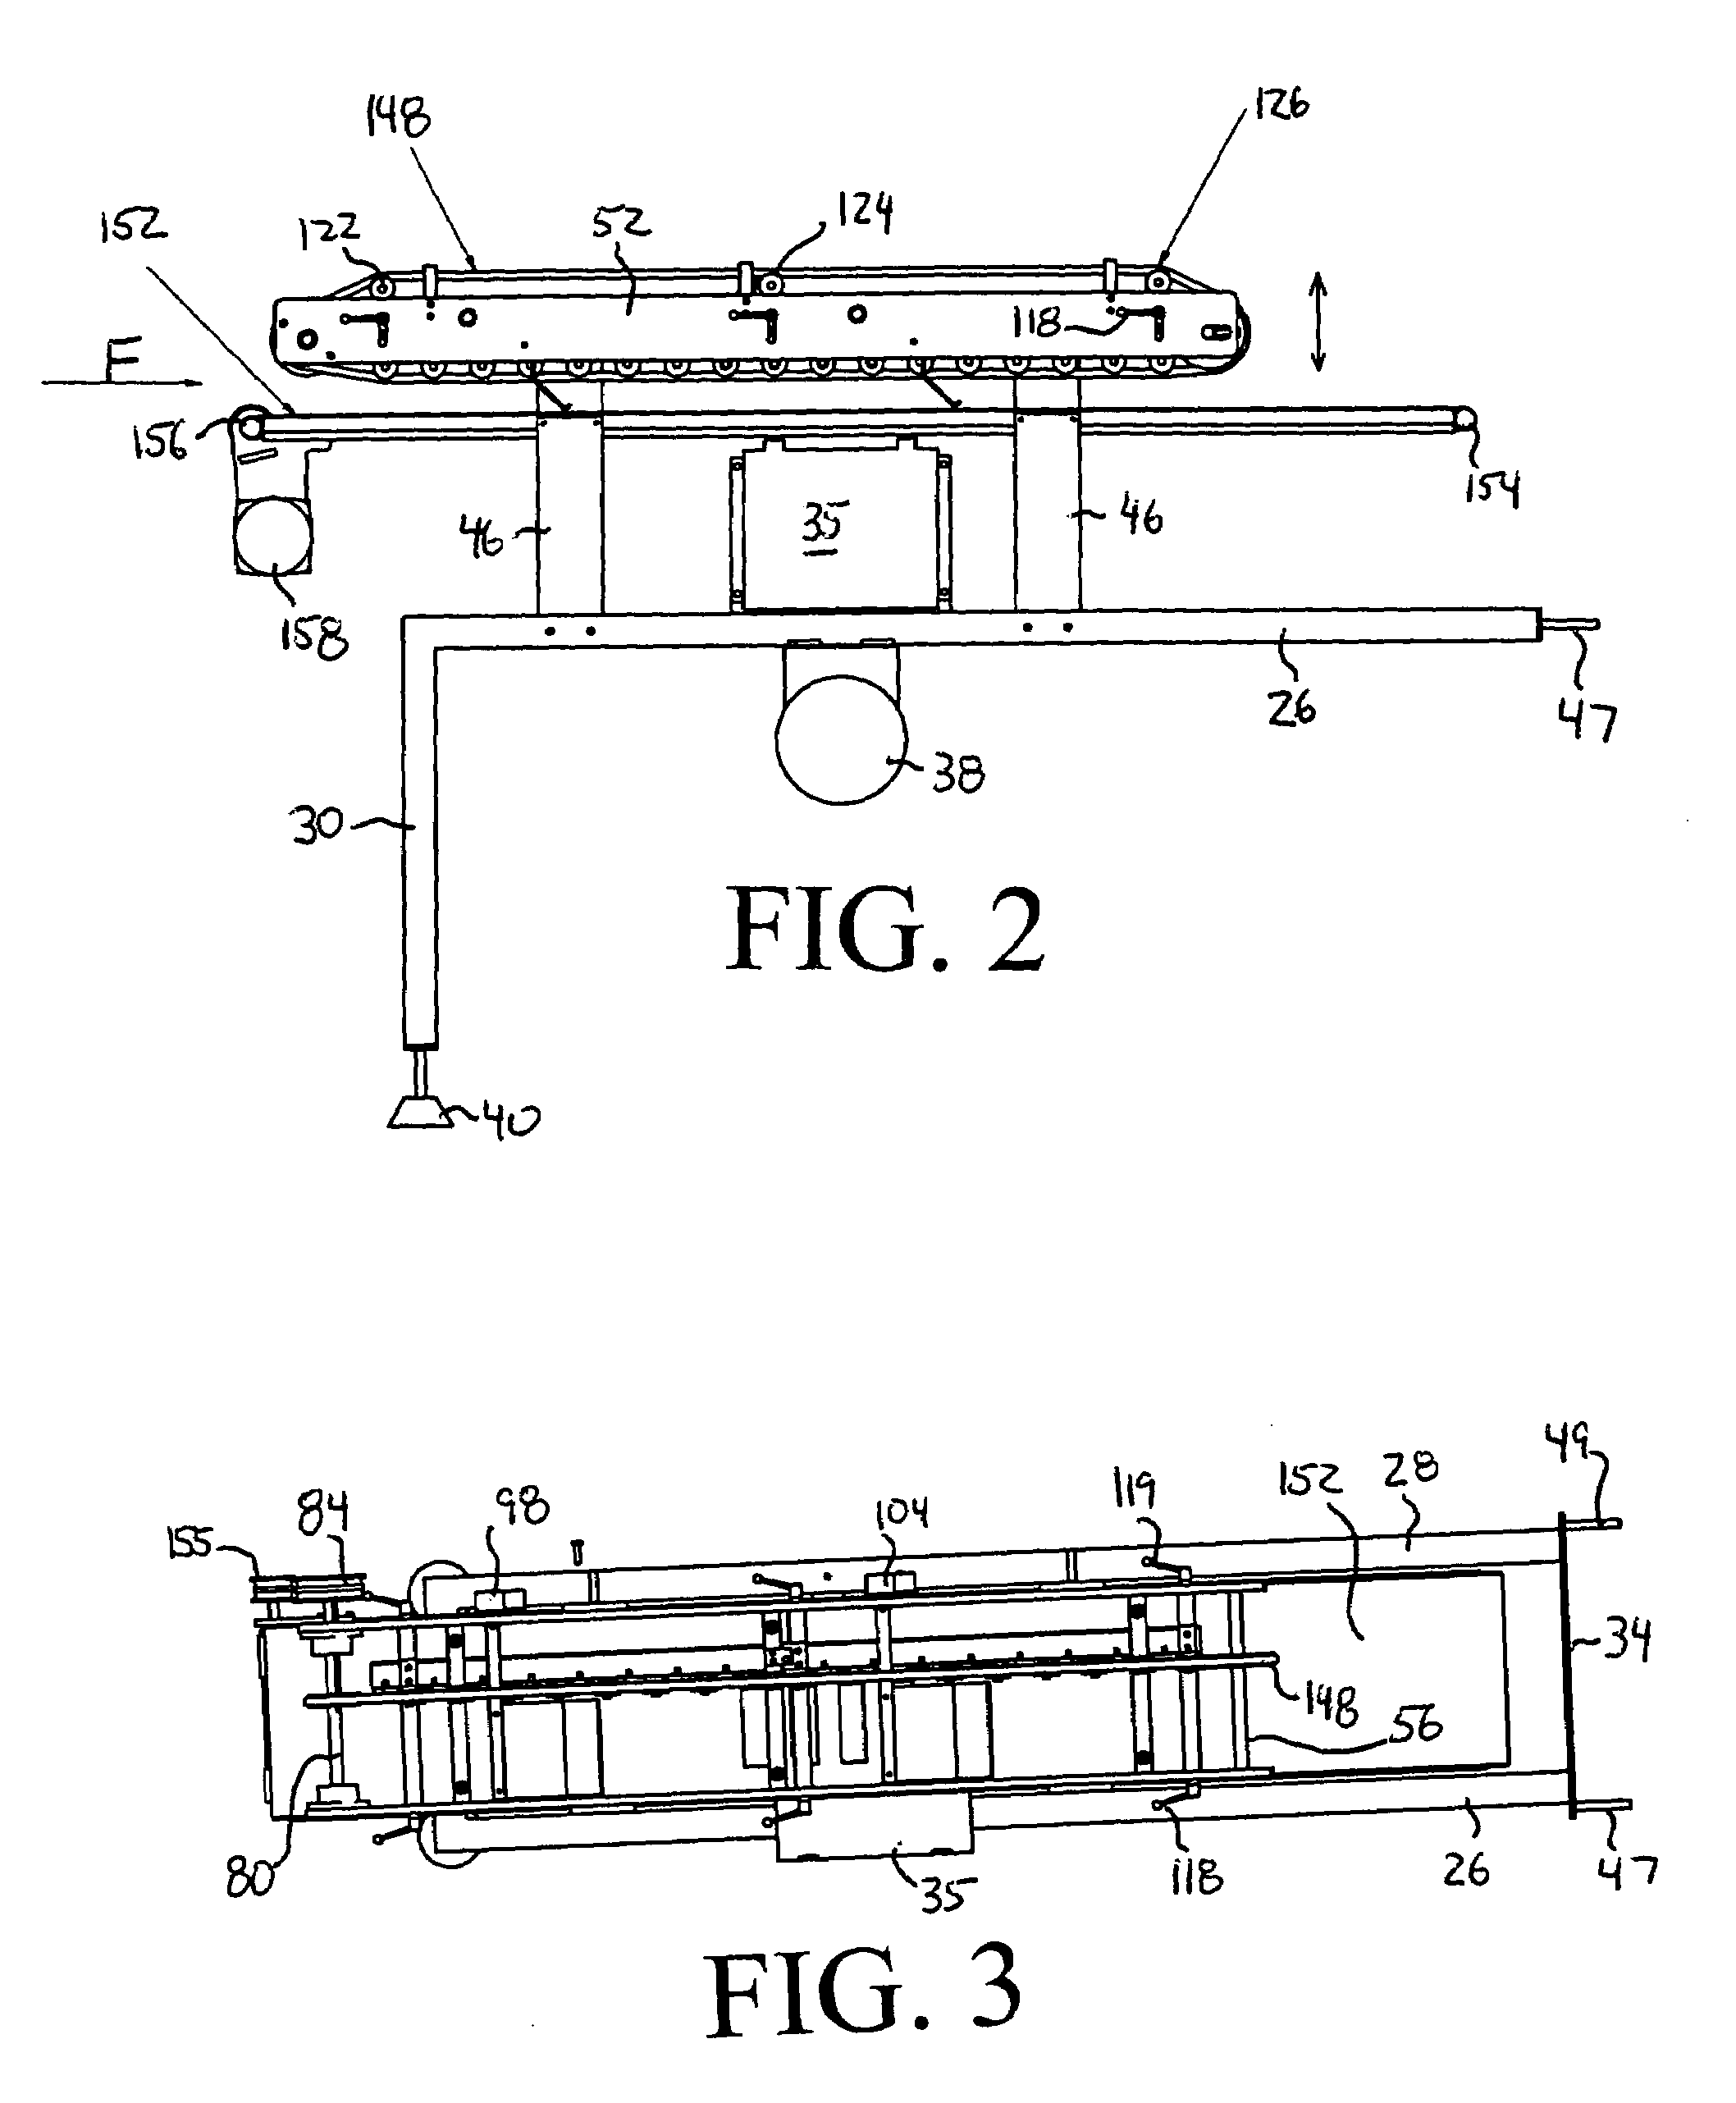 Package seal inspecting apparatus, and method for inspecting package seals